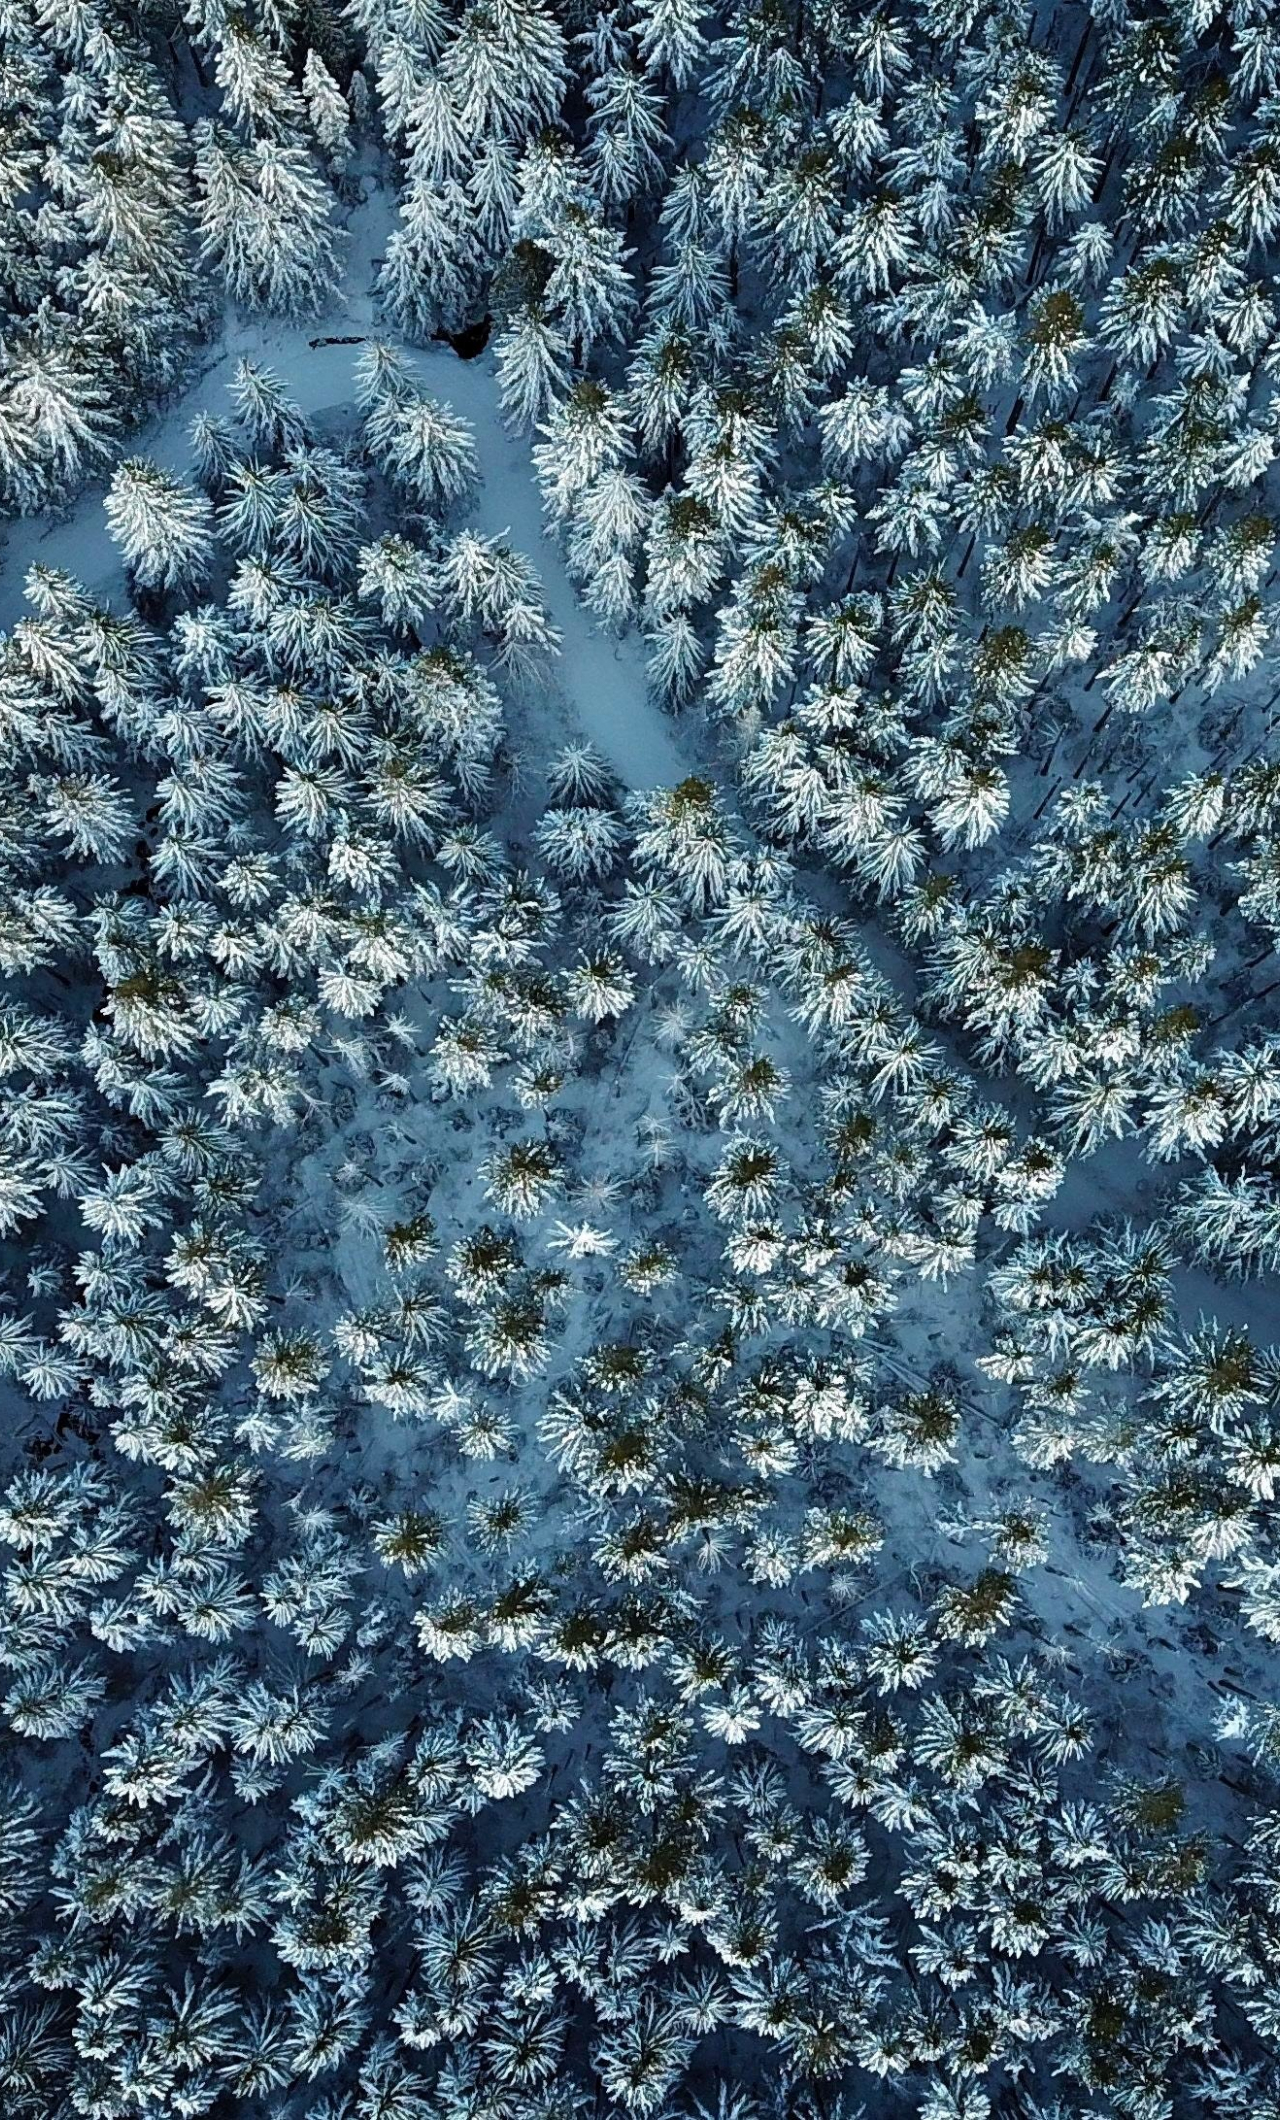 Download winter, pine tree, nature, aerial view 1280x2120 wallpaper, iphone 6 plus, 1280x2120 HD image, background, 15544